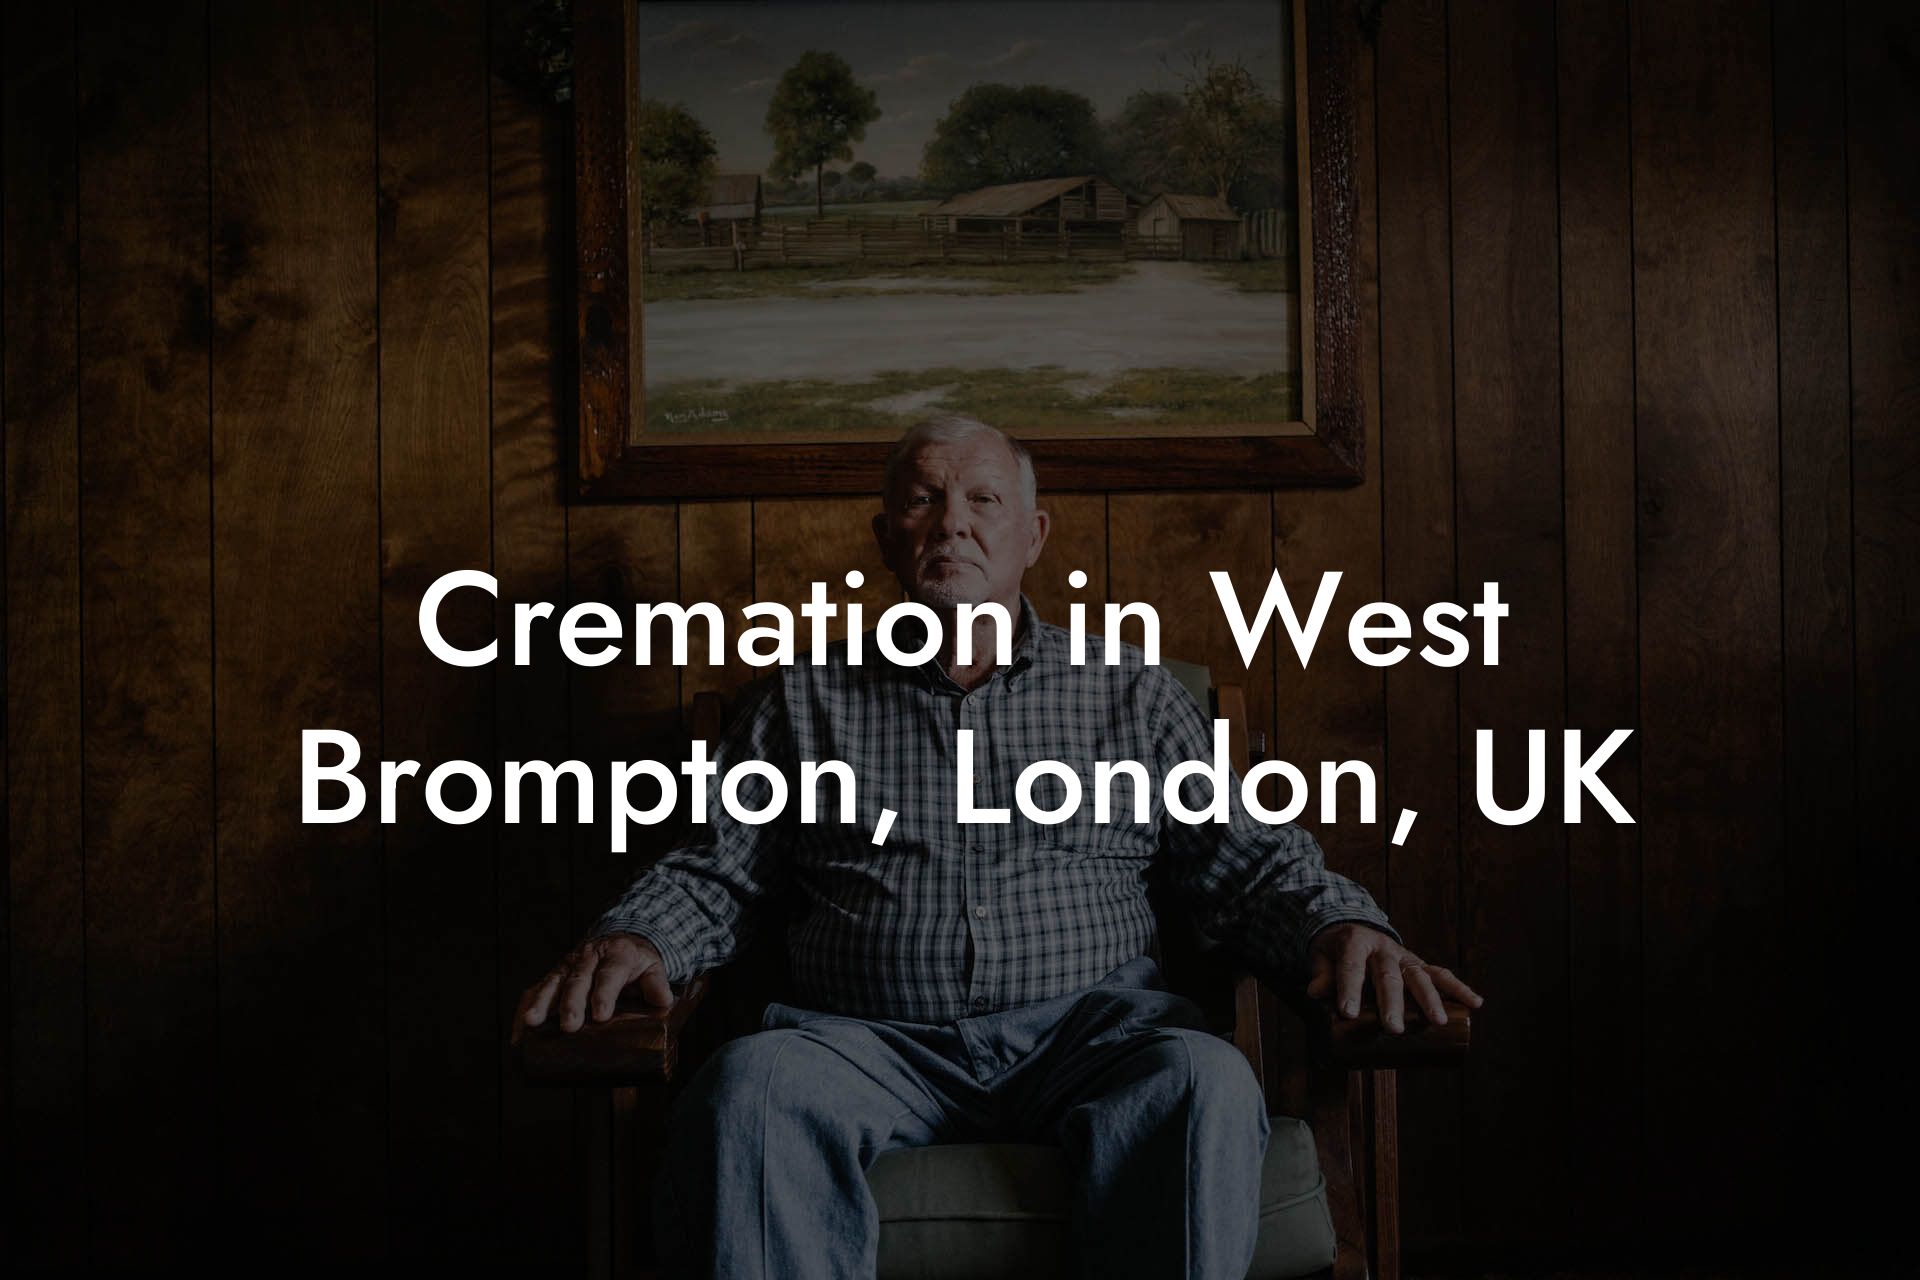 Cremation in West Brompton, London, UK